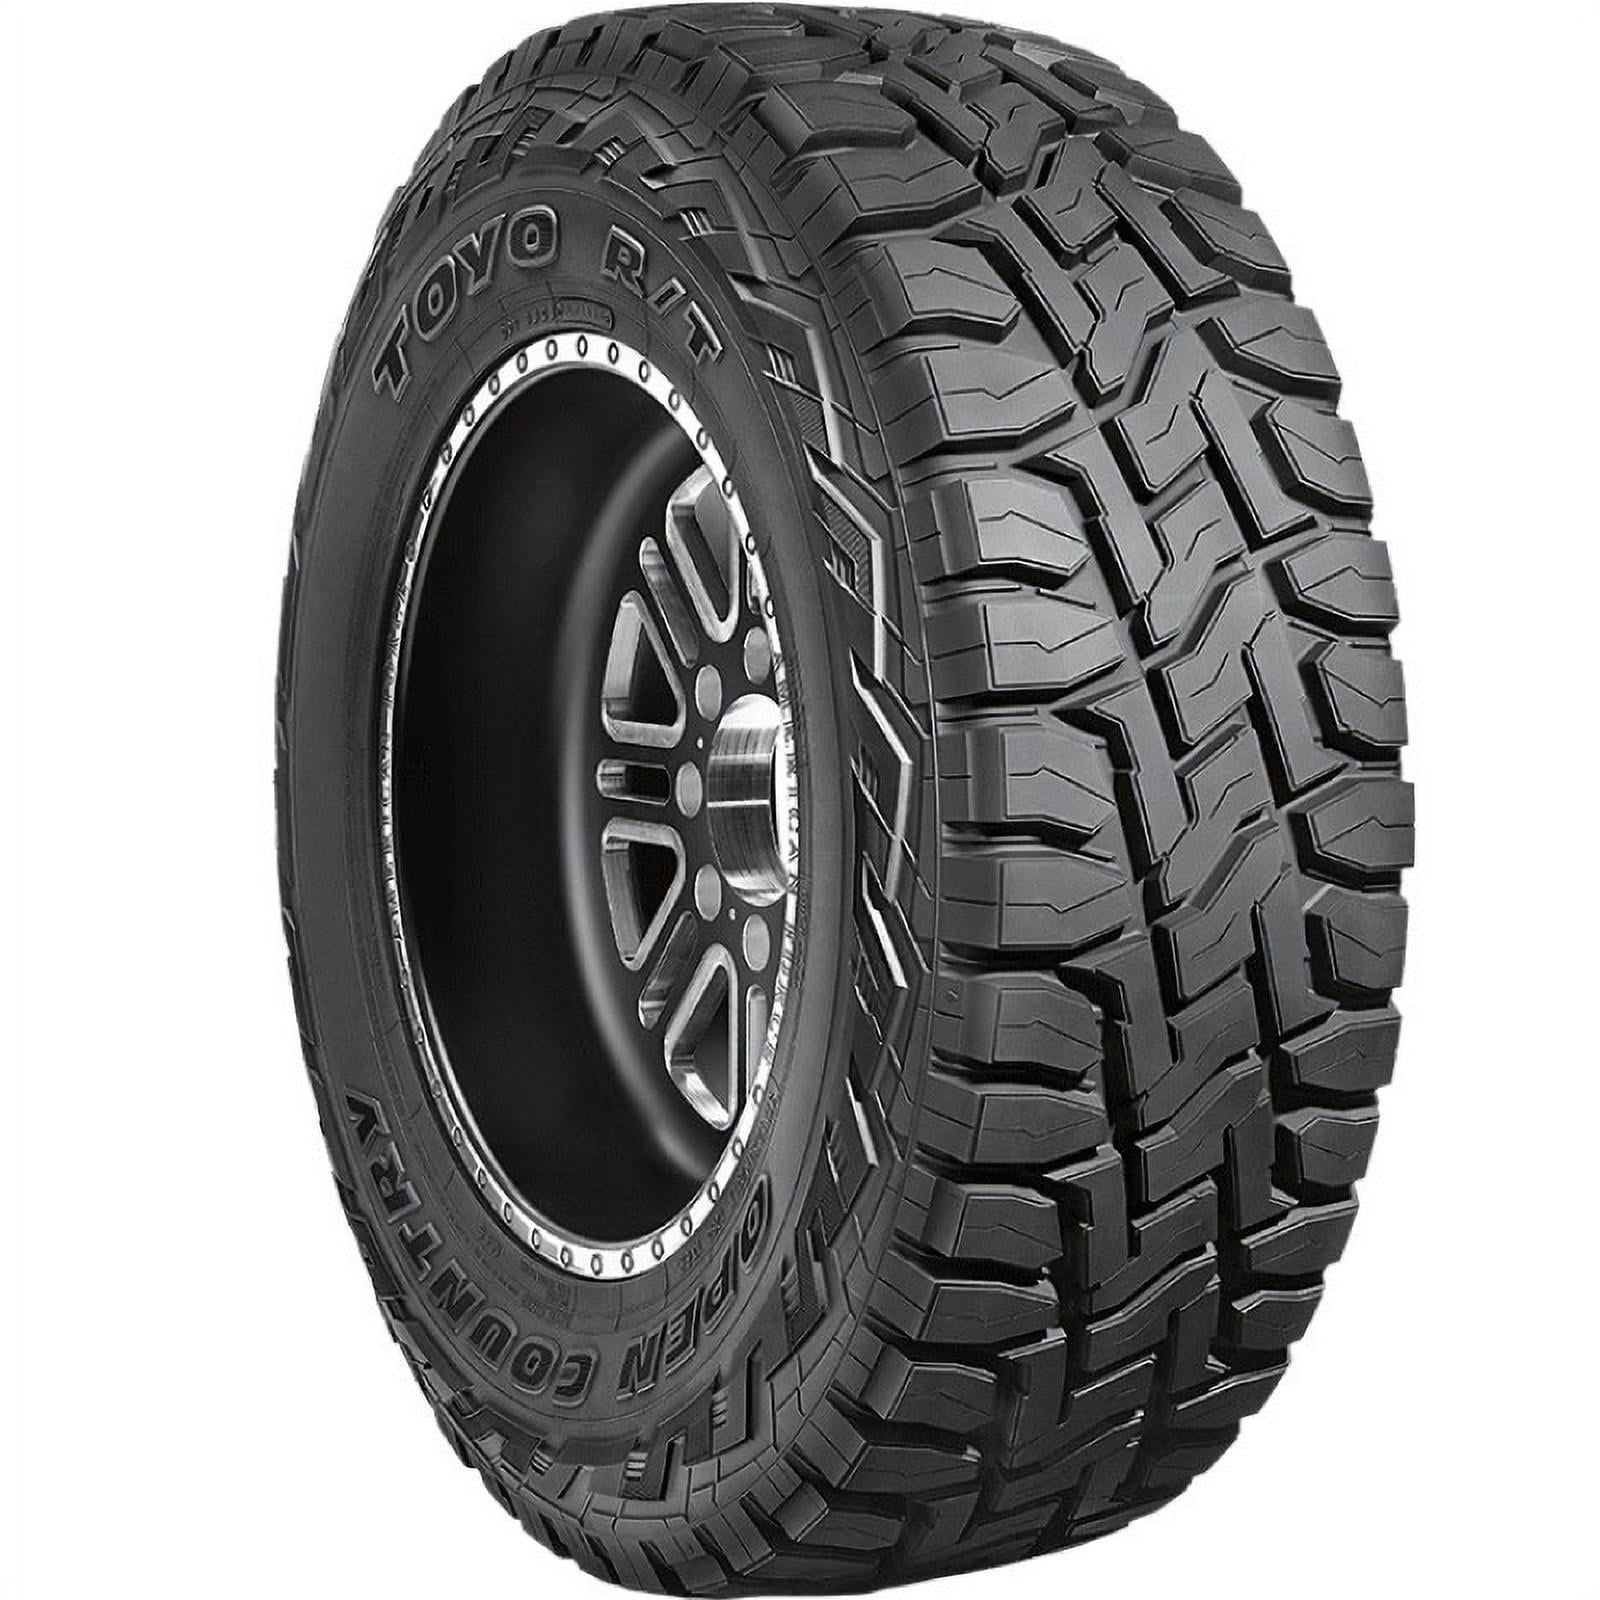 Toyo Open Country R/T LT 265/70R17 Load E 10 Ply RT Rugged Terrain Tire